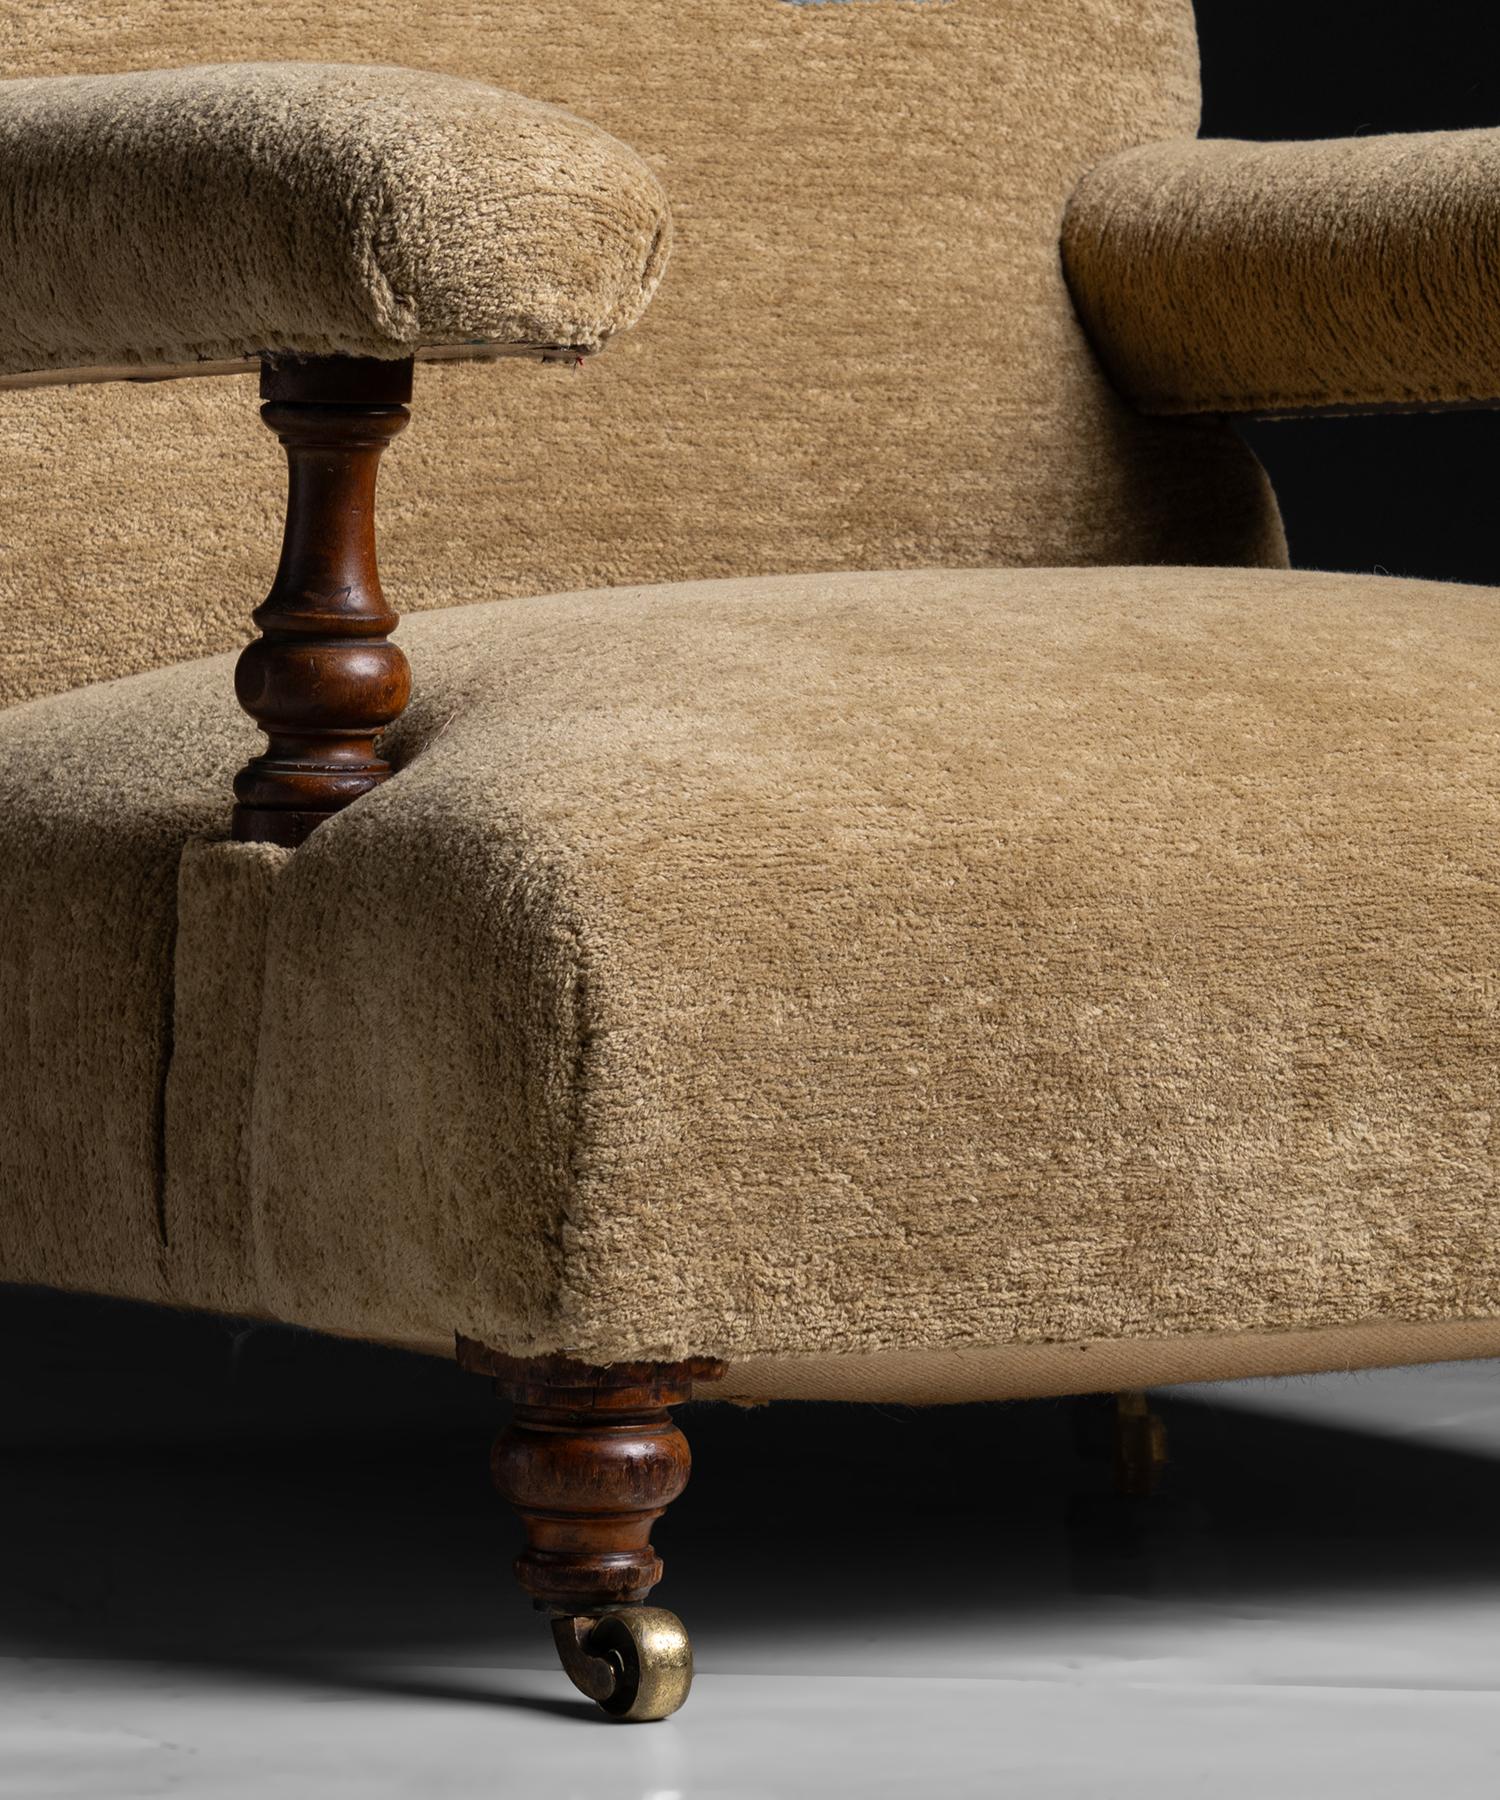 English Howard & Sons Open Armchair in Chenille by Pierre Frey, England circa 1850